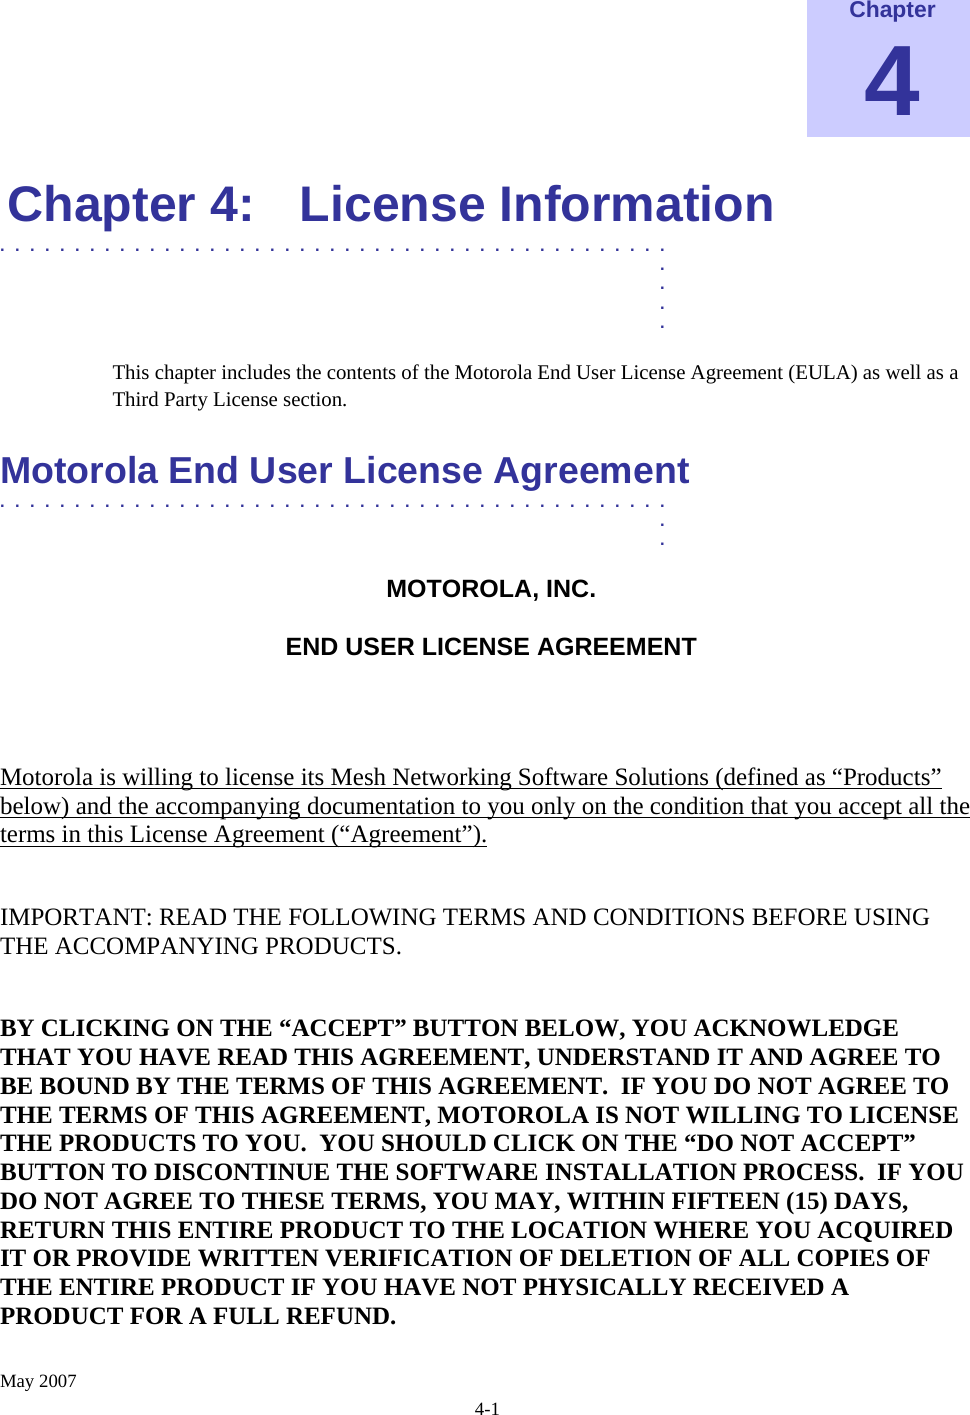    May 2007 4-1 Chapter 4 Chapter 4:  License Information .............................................  .  .  .  . This chapter includes the contents of the Motorola End User License Agreement (EULA) as well as a Third Party License section.  Motorola End User License Agreement  .............................................  .  . MOTOROLA, INC.  END USER LICENSE AGREEMENT  Motorola is willing to license its Mesh Networking Software Solutions (defined as “Products” below) and the accompanying documentation to you only on the condition that you accept all the terms in this License Agreement (“Agreement”).  IMPORTANT: READ THE FOLLOWING TERMS AND CONDITIONS BEFORE USING THE ACCOMPANYING PRODUCTS.  BY CLICKING ON THE “ACCEPT” BUTTON BELOW, YOU ACKNOWLEDGE THAT YOU HAVE READ THIS AGREEMENT, UNDERSTAND IT AND AGREE TO BE BOUND BY THE TERMS OF THIS AGREEMENT.  IF YOU DO NOT AGREE TO THE TERMS OF THIS AGREEMENT, MOTOROLA IS NOT WILLING TO LICENSE THE PRODUCTS TO YOU.  YOU SHOULD CLICK ON THE “DO NOT ACCEPT” BUTTON TO DISCONTINUE THE SOFTWARE INSTALLATION PROCESS.  IF YOU DO NOT AGREE TO THESE TERMS, YOU MAY, WITHIN FIFTEEN (15) DAYS, RETURN THIS ENTIRE PRODUCT TO THE LOCATION WHERE YOU ACQUIRED IT OR PROVIDE WRITTEN VERIFICATION OF DELETION OF ALL COPIES OF THE ENTIRE PRODUCT IF YOU HAVE NOT PHYSICALLY RECEIVED A PRODUCT FOR A FULL REFUND.  